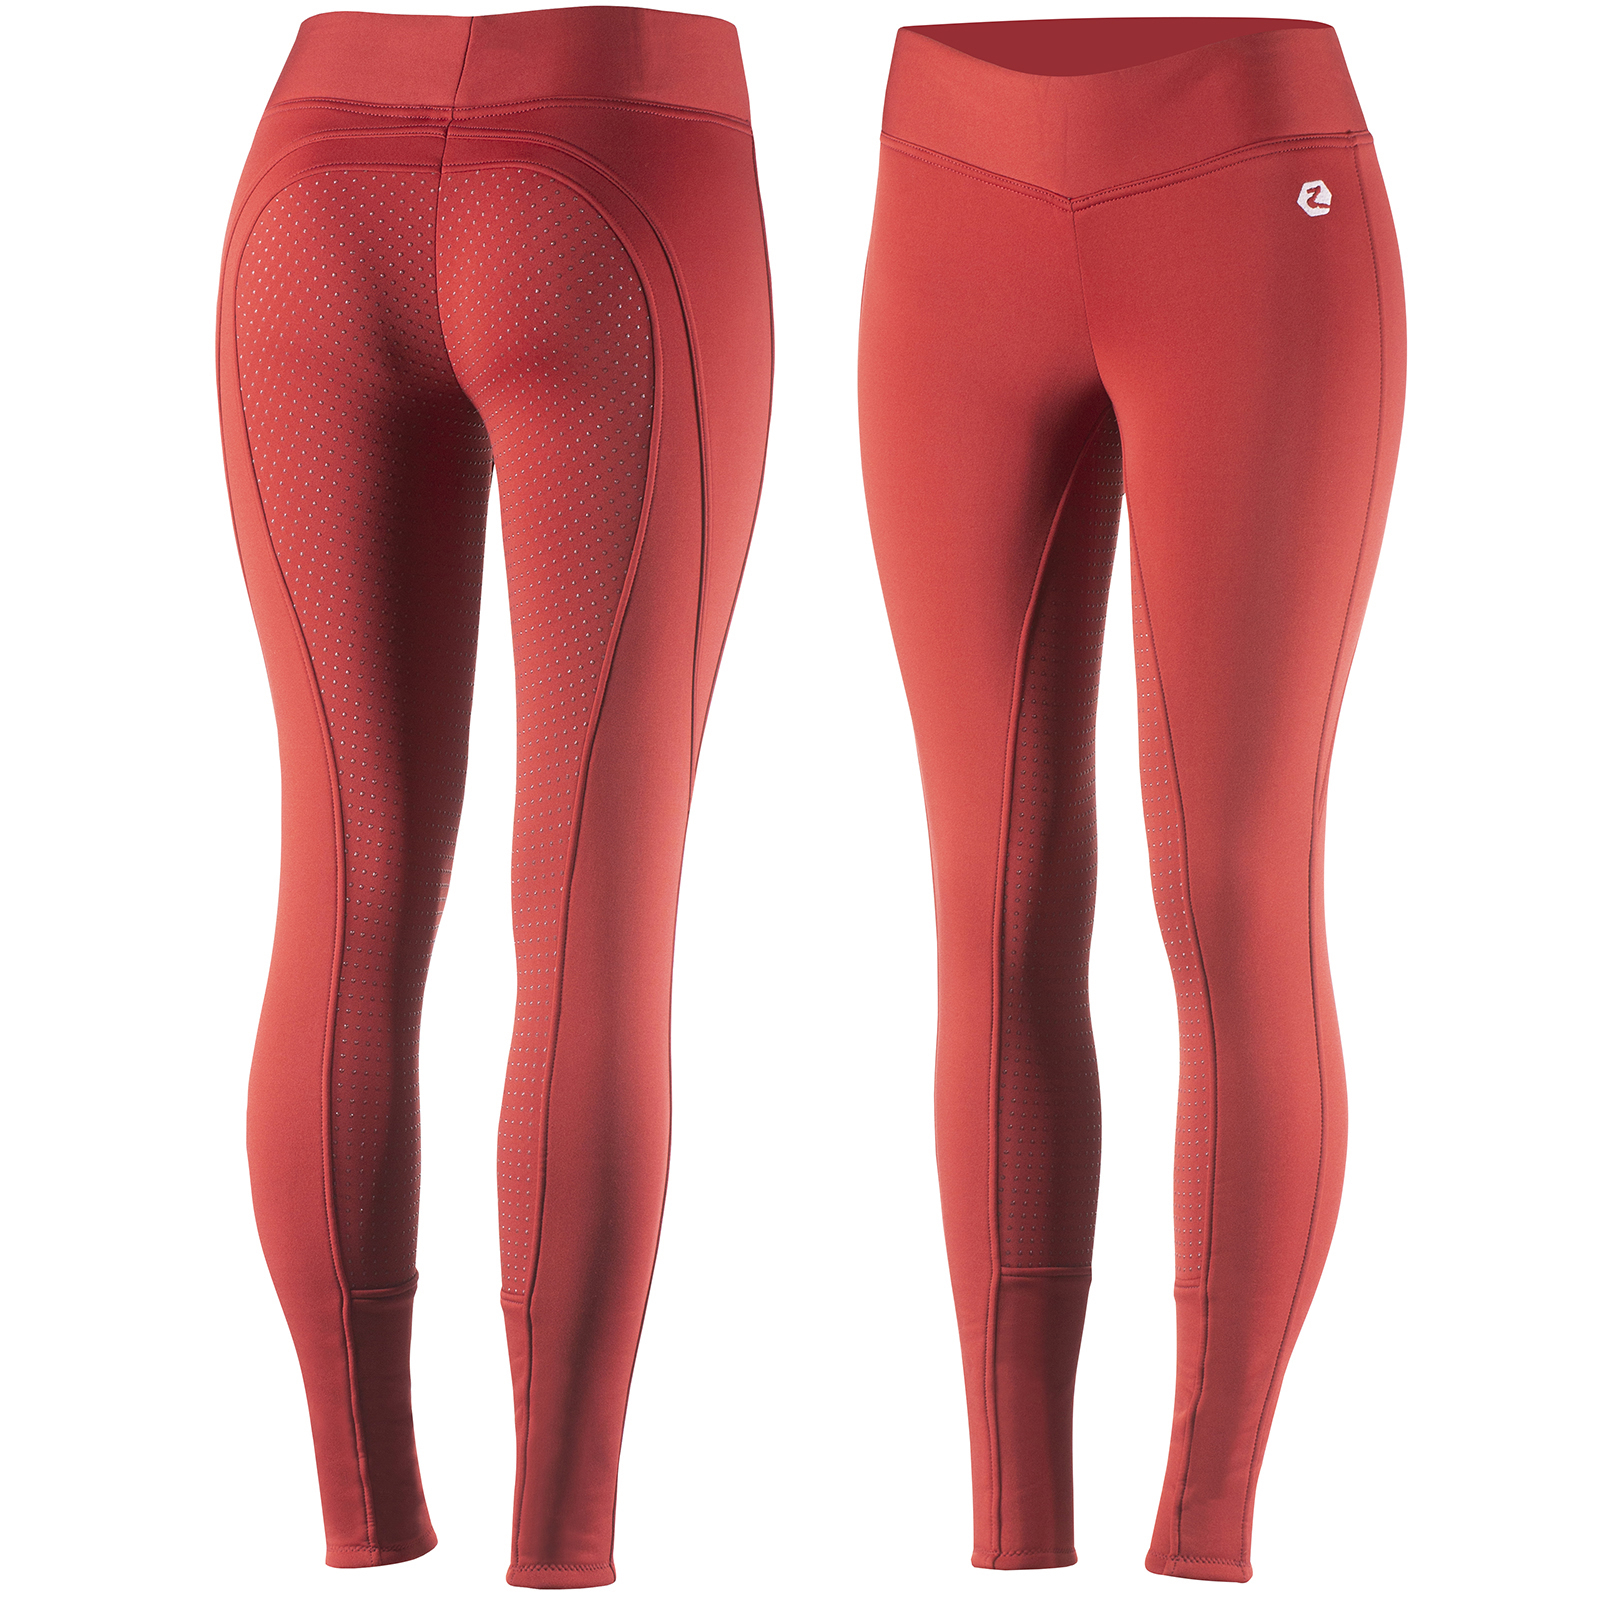 Buy ToBeInStyle Women's Opaque Full Footed Skin Tight Leggings Lace Trim  (Red) at